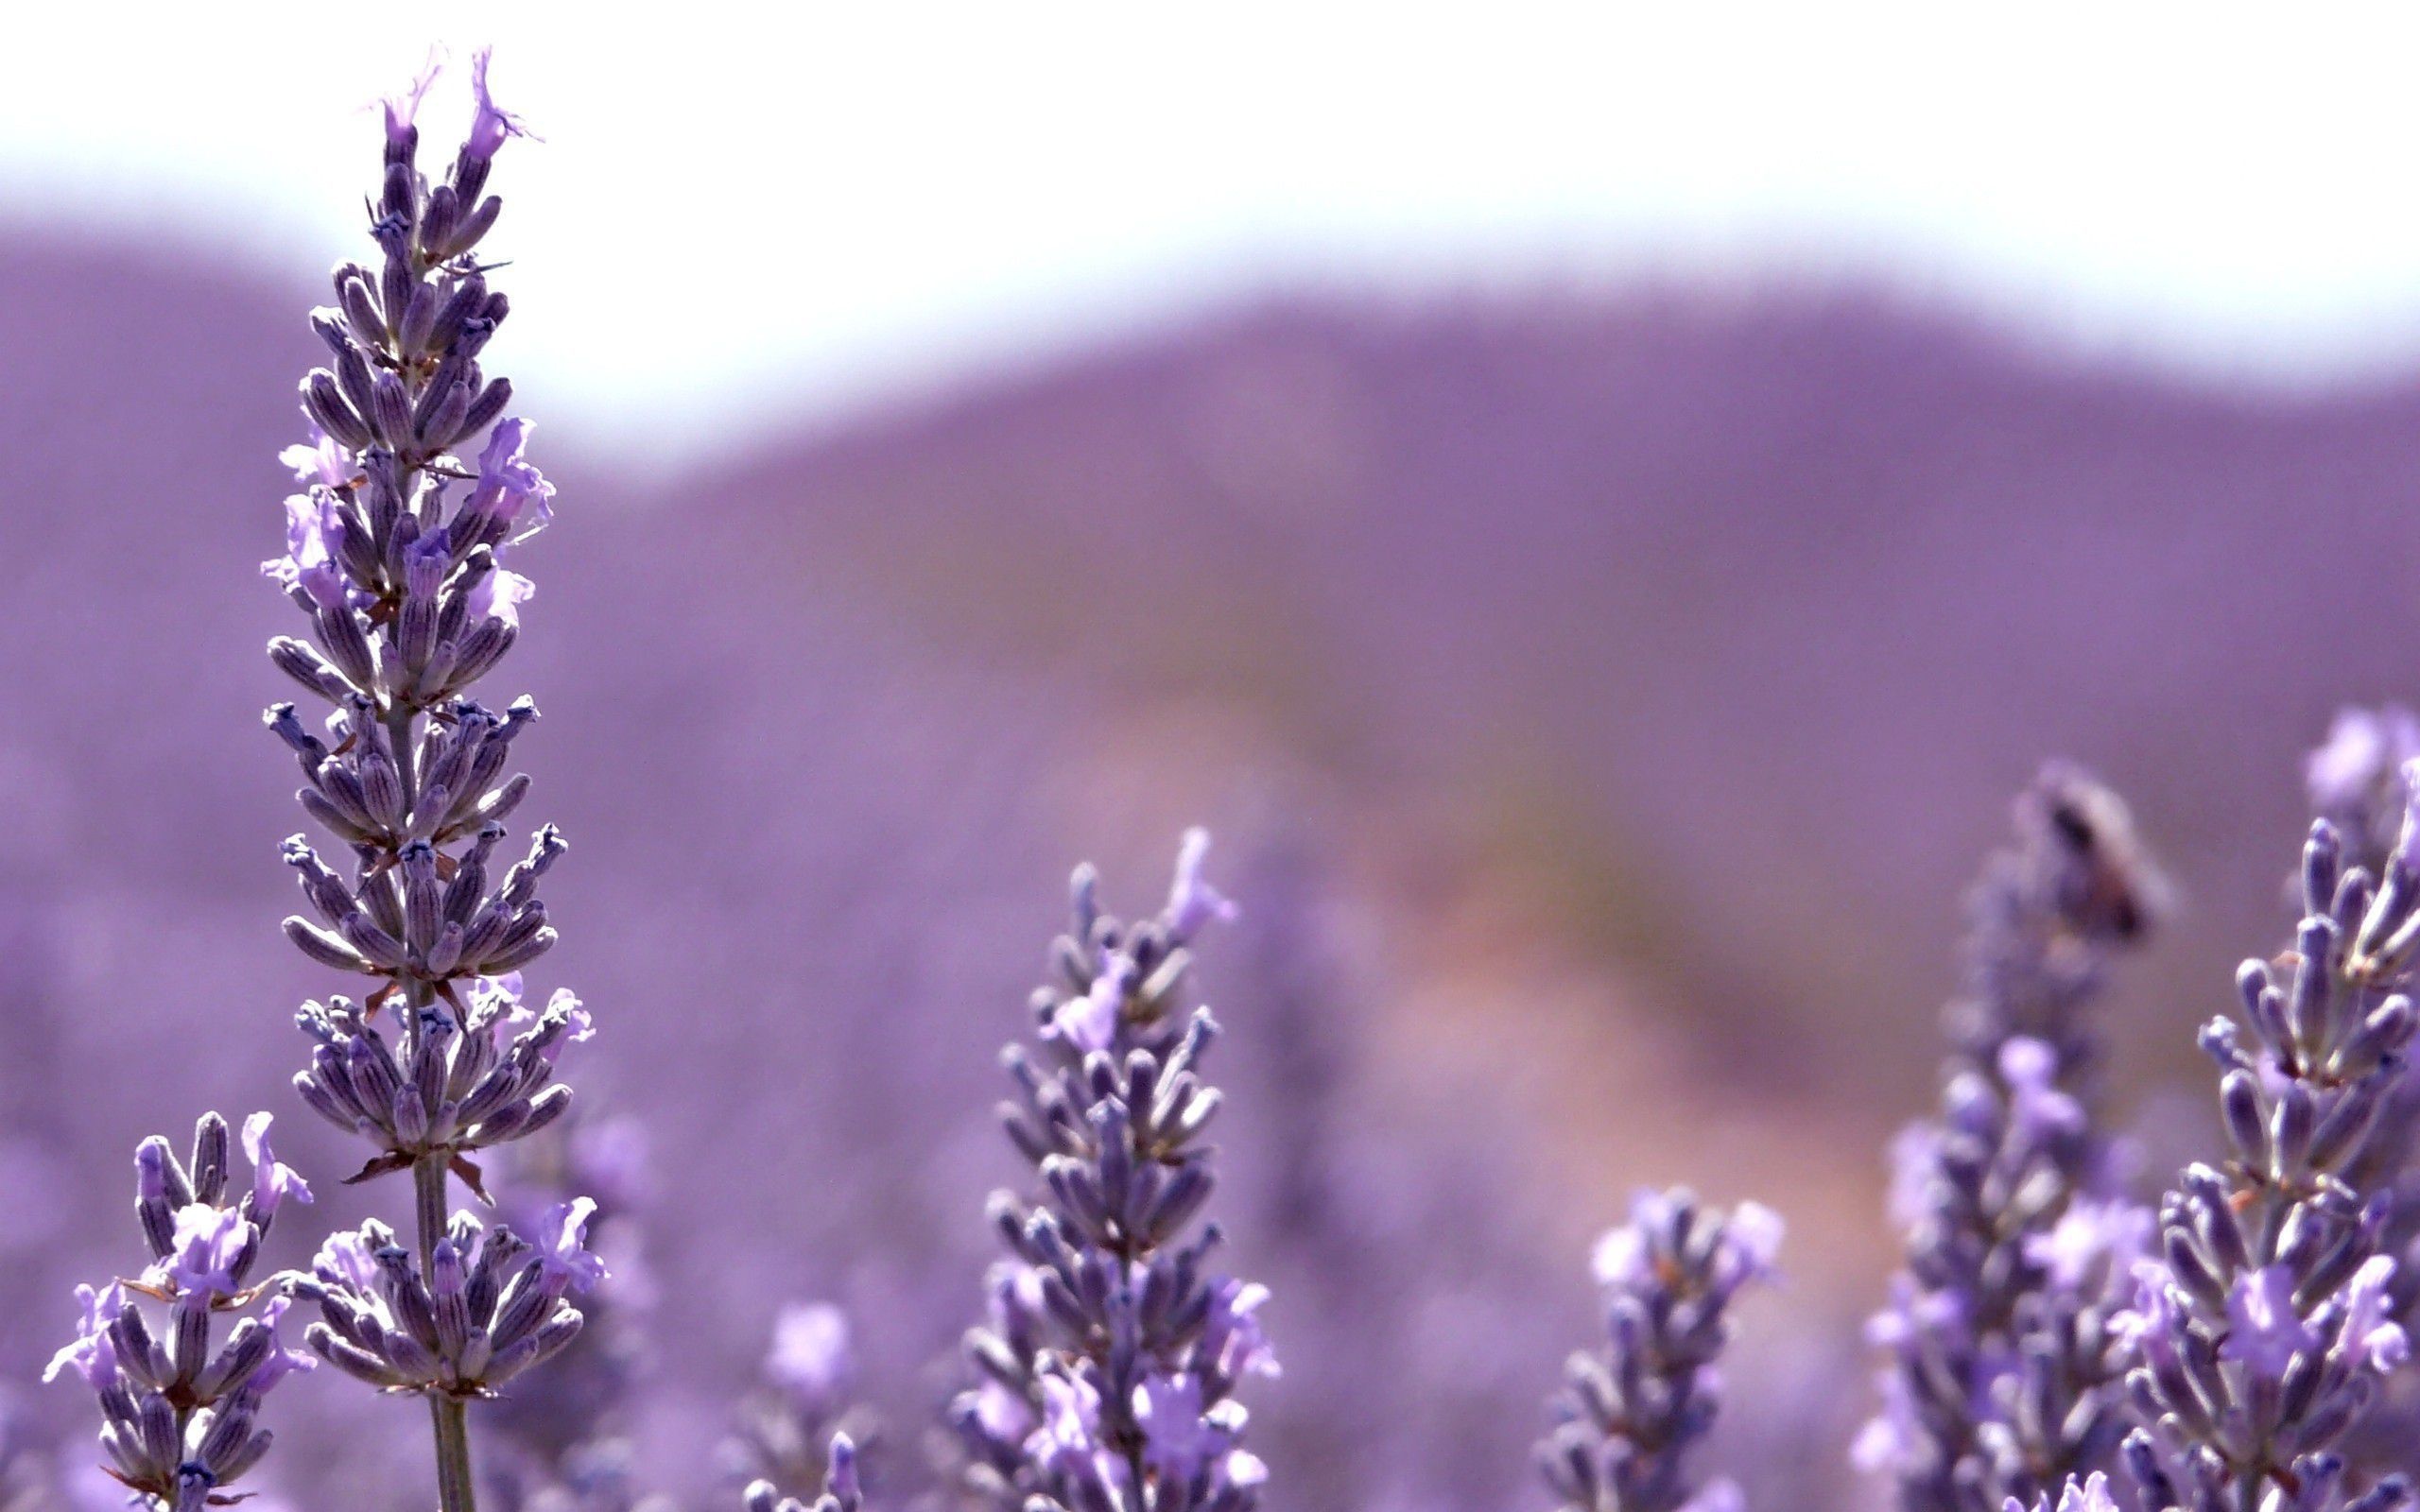 Latest HD wallpapers, Flowers lavender, Nature's gift, Floral beauty, 2560x1600 HD Desktop